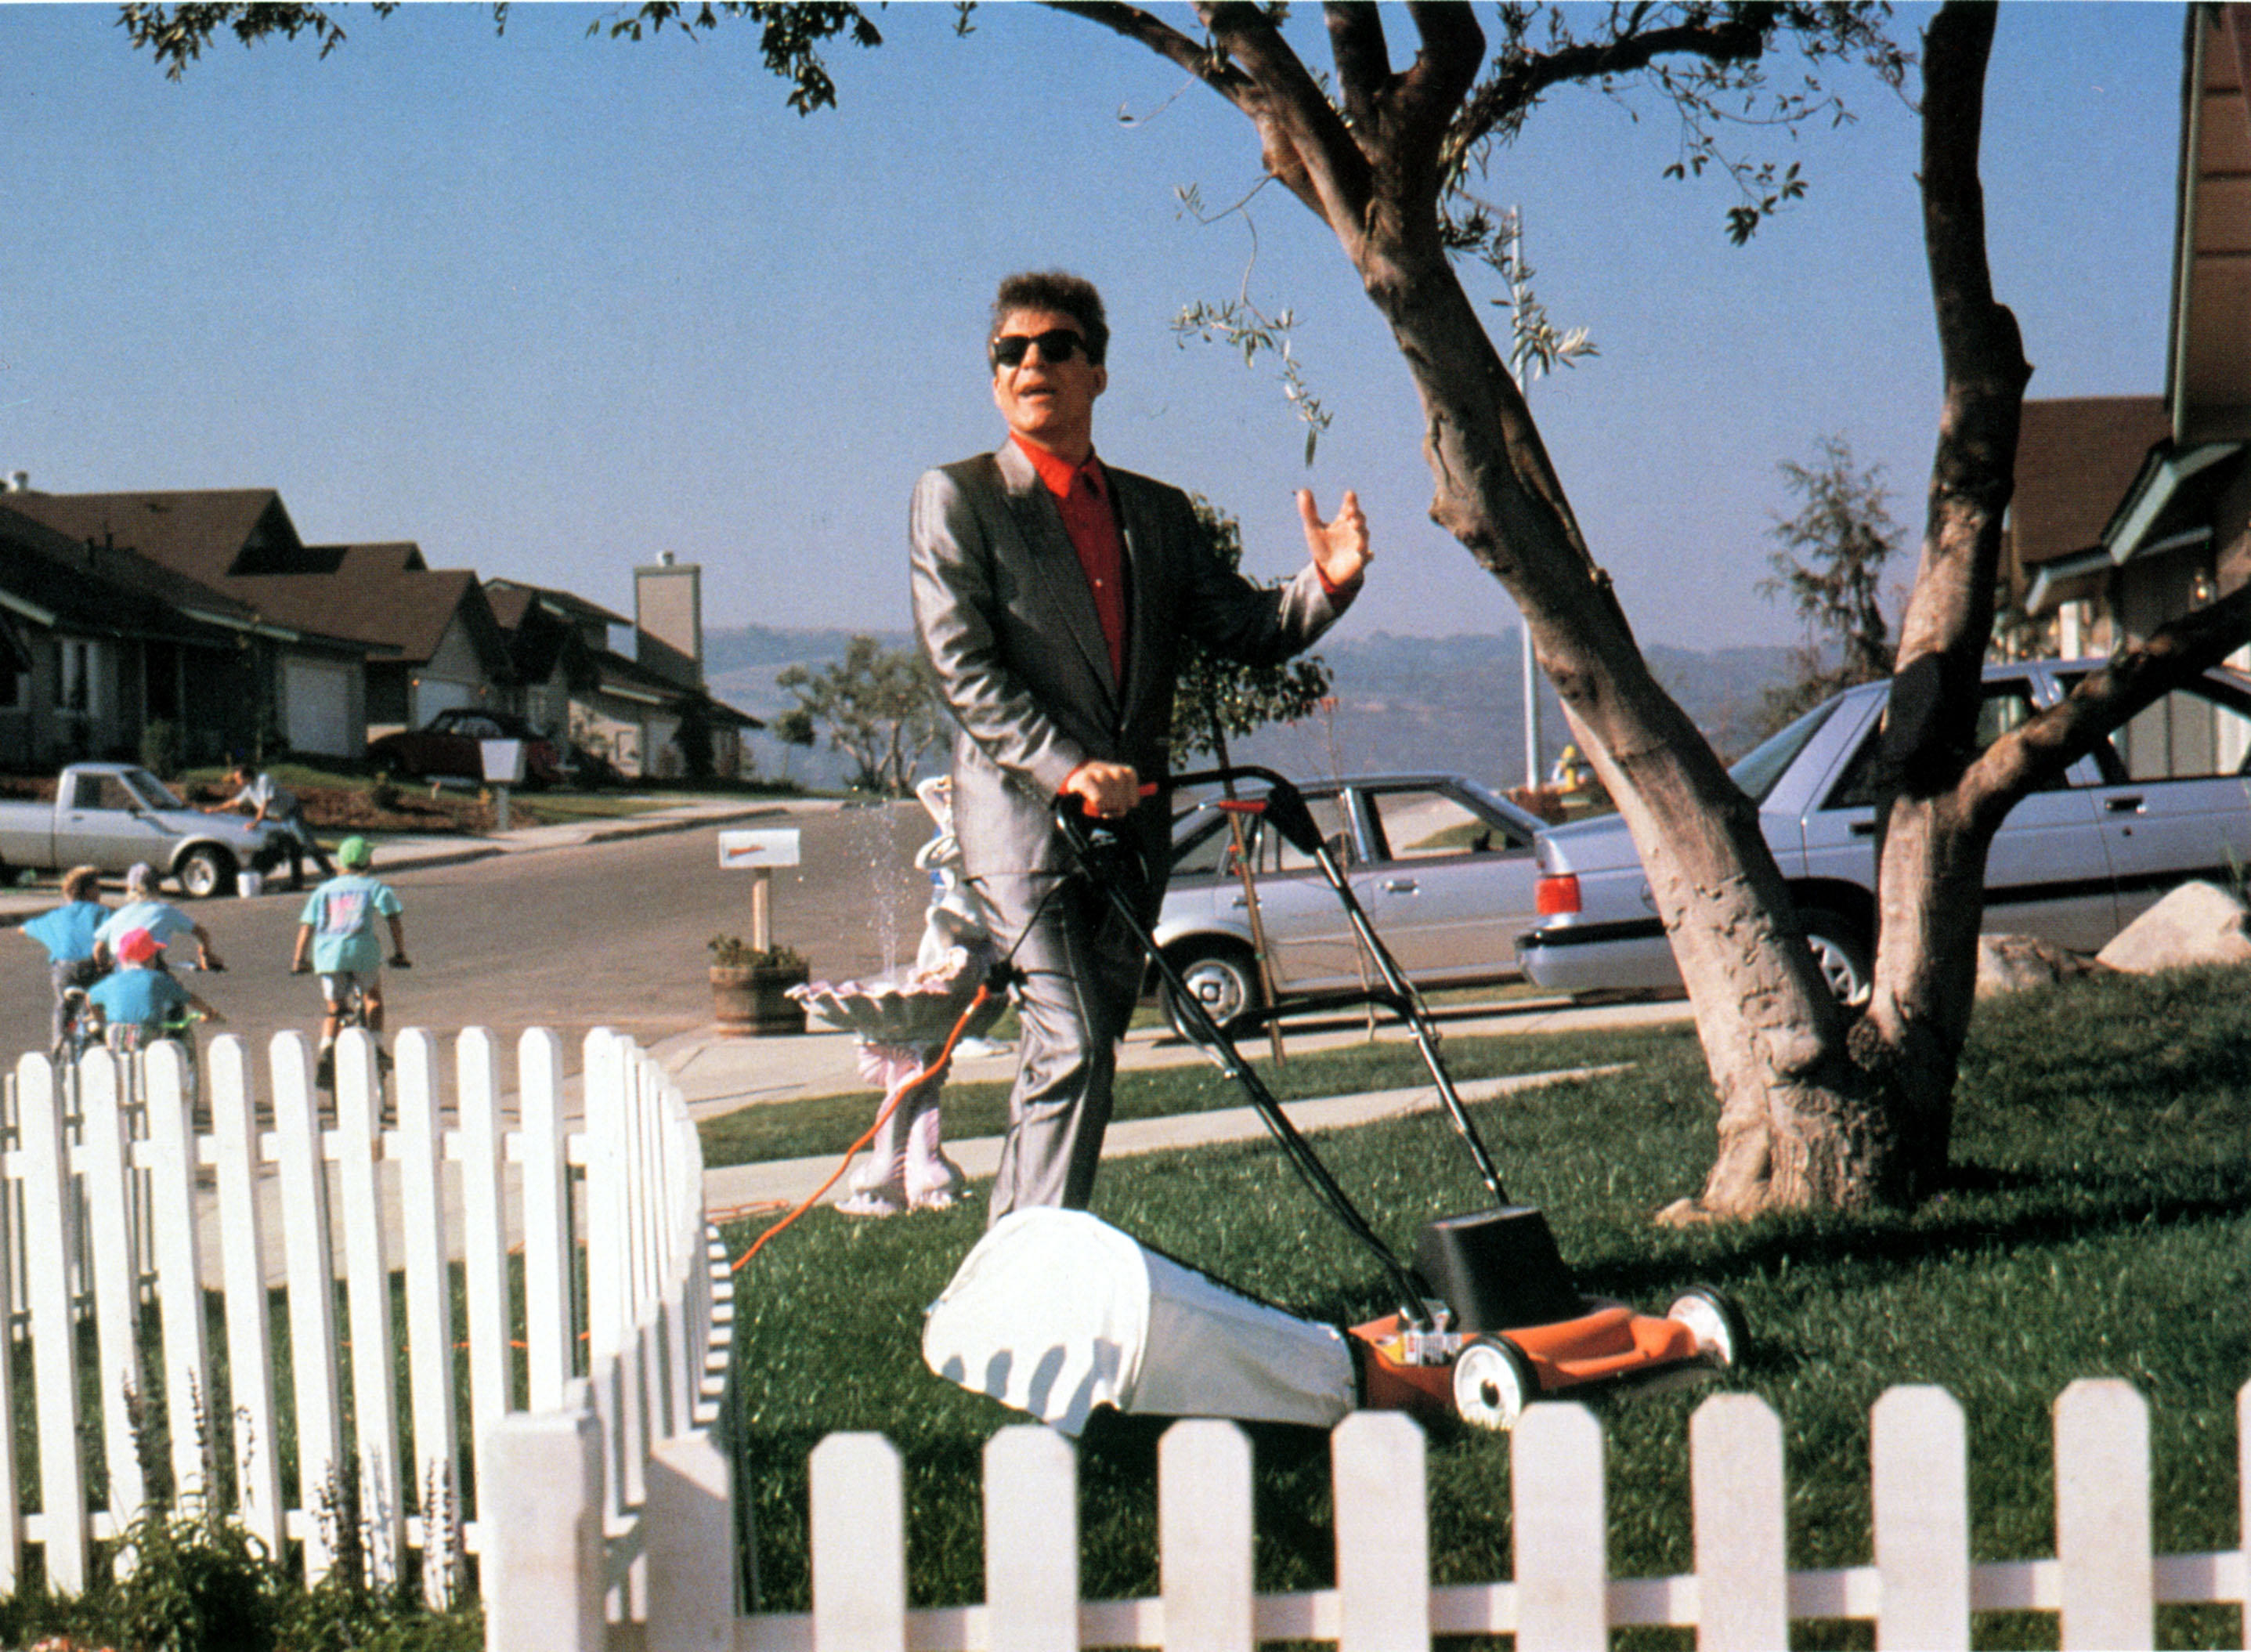 A gangster in a colorful three-piece suit mows his lawn in a suburban neighborhood